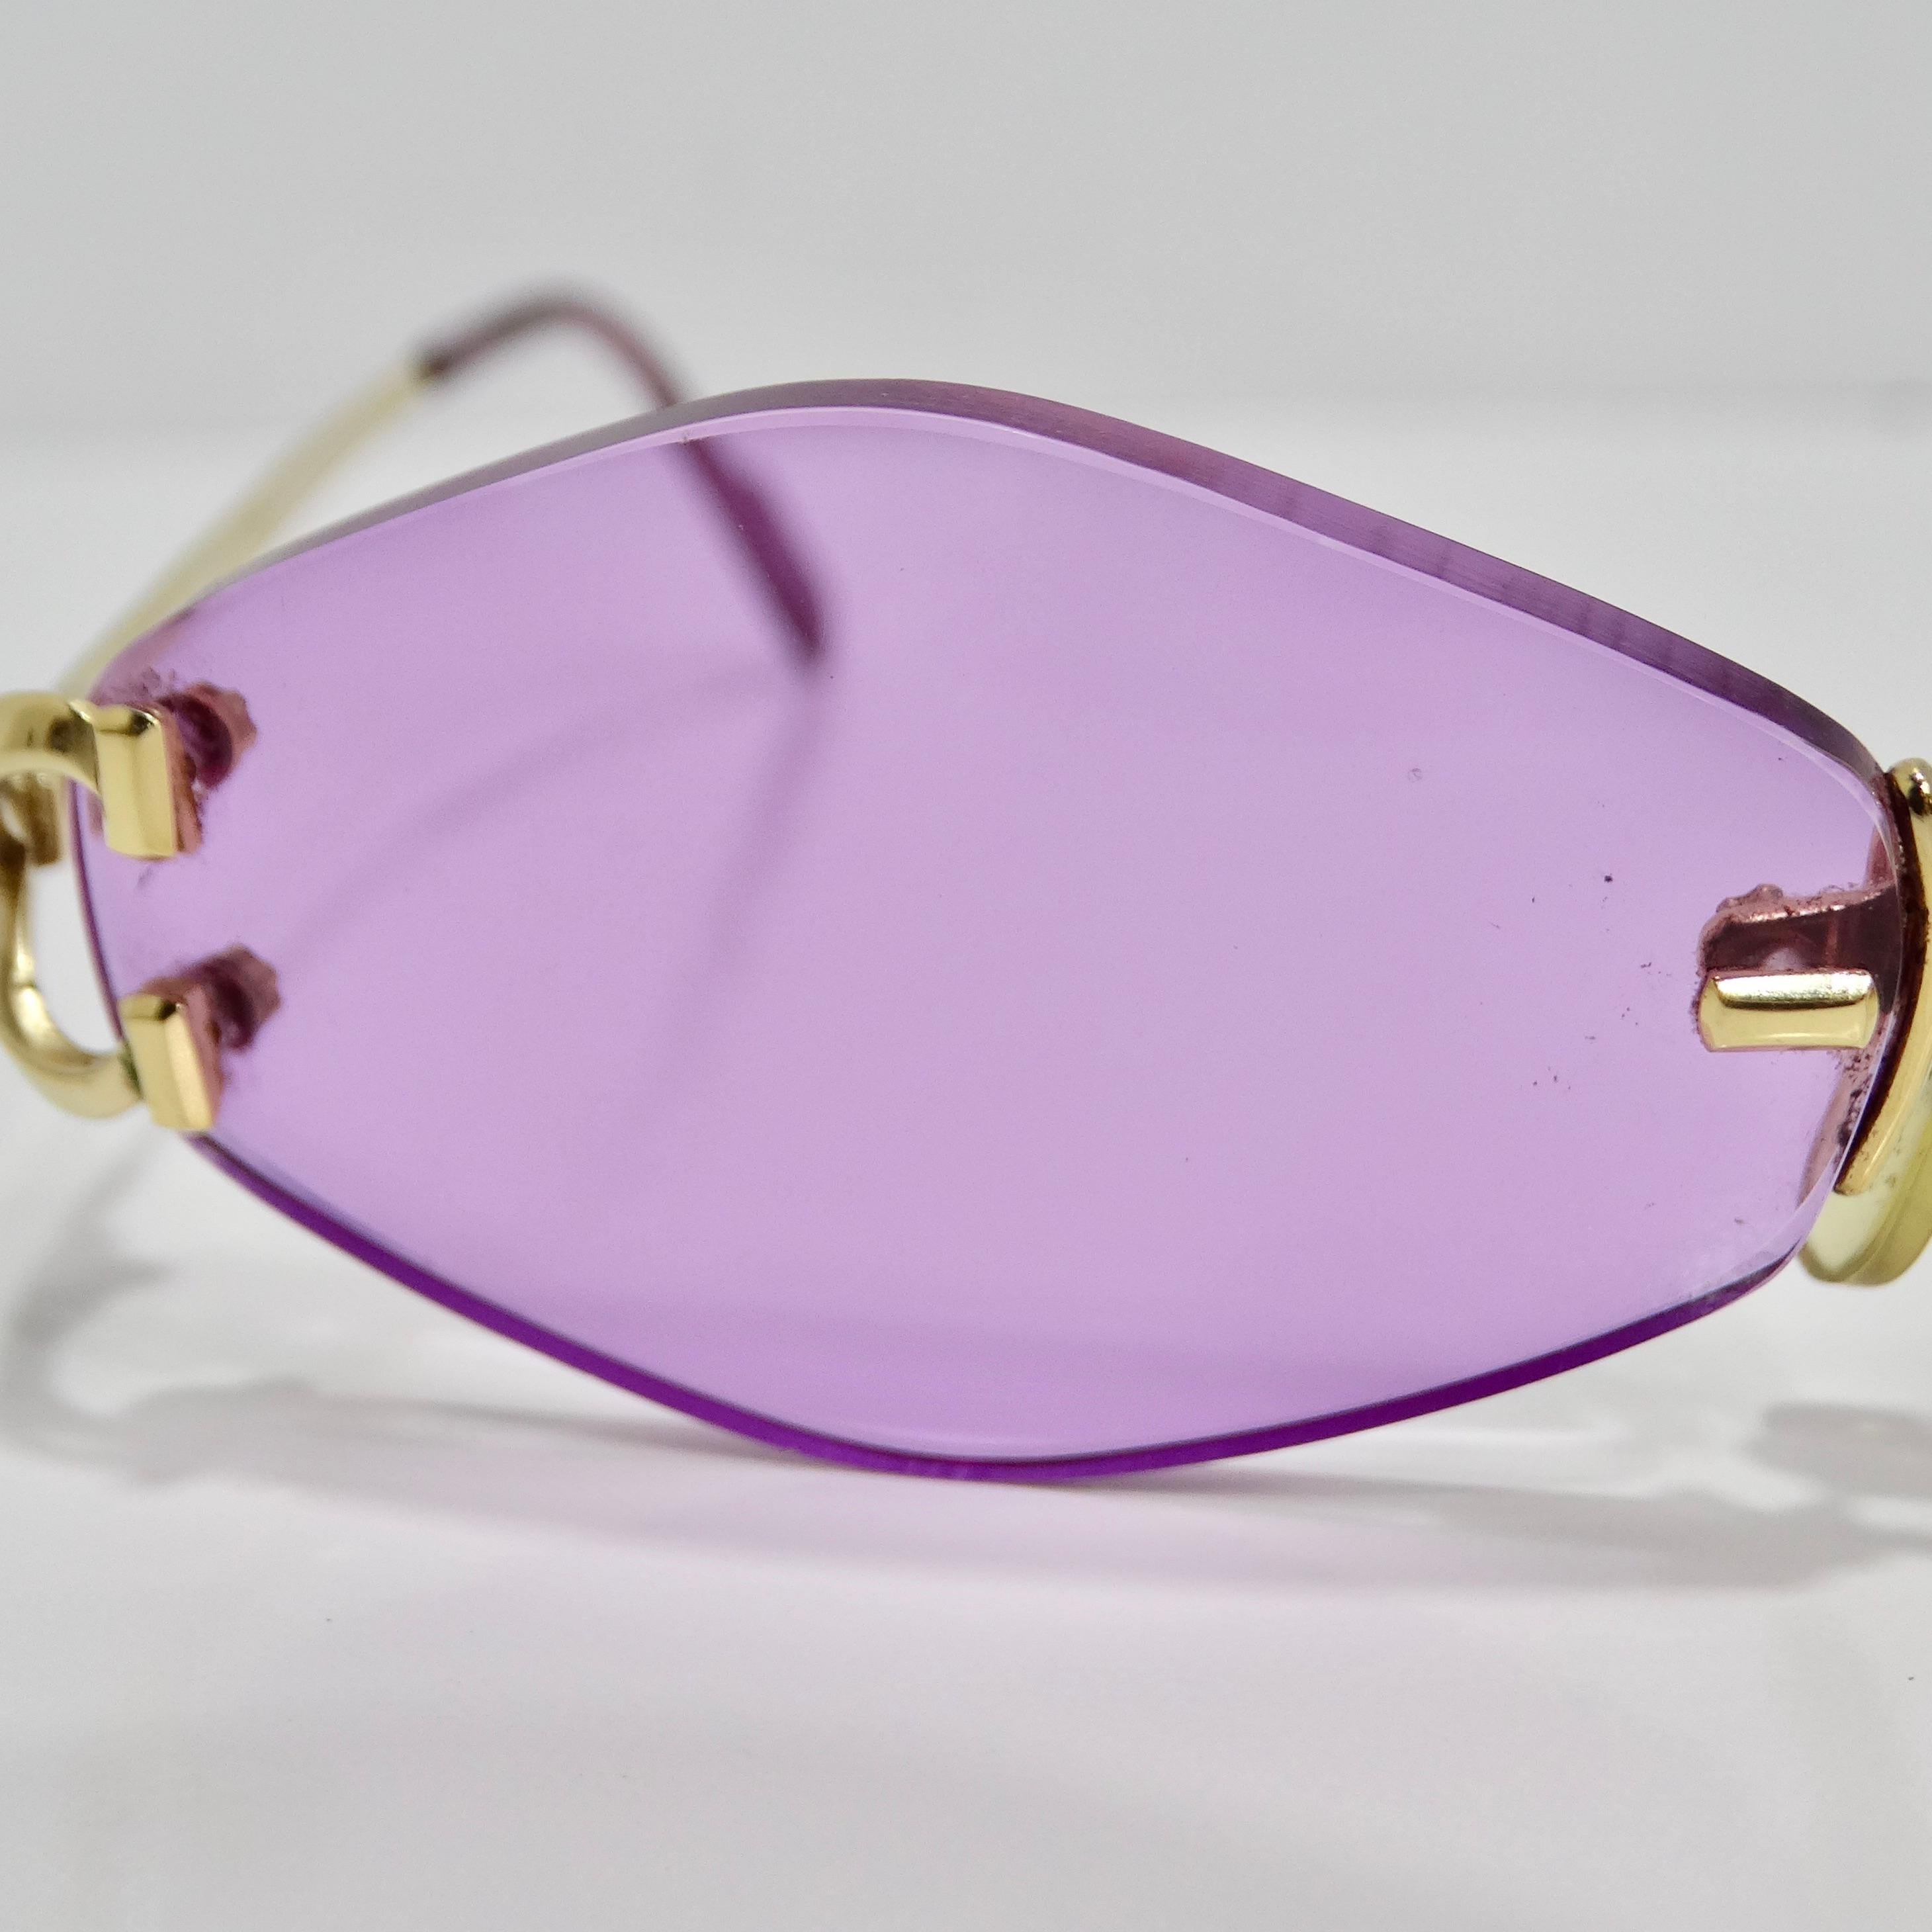 Cartier Vintage Rimless Purple Sunglasses In Good Condition For Sale In Scottsdale, AZ